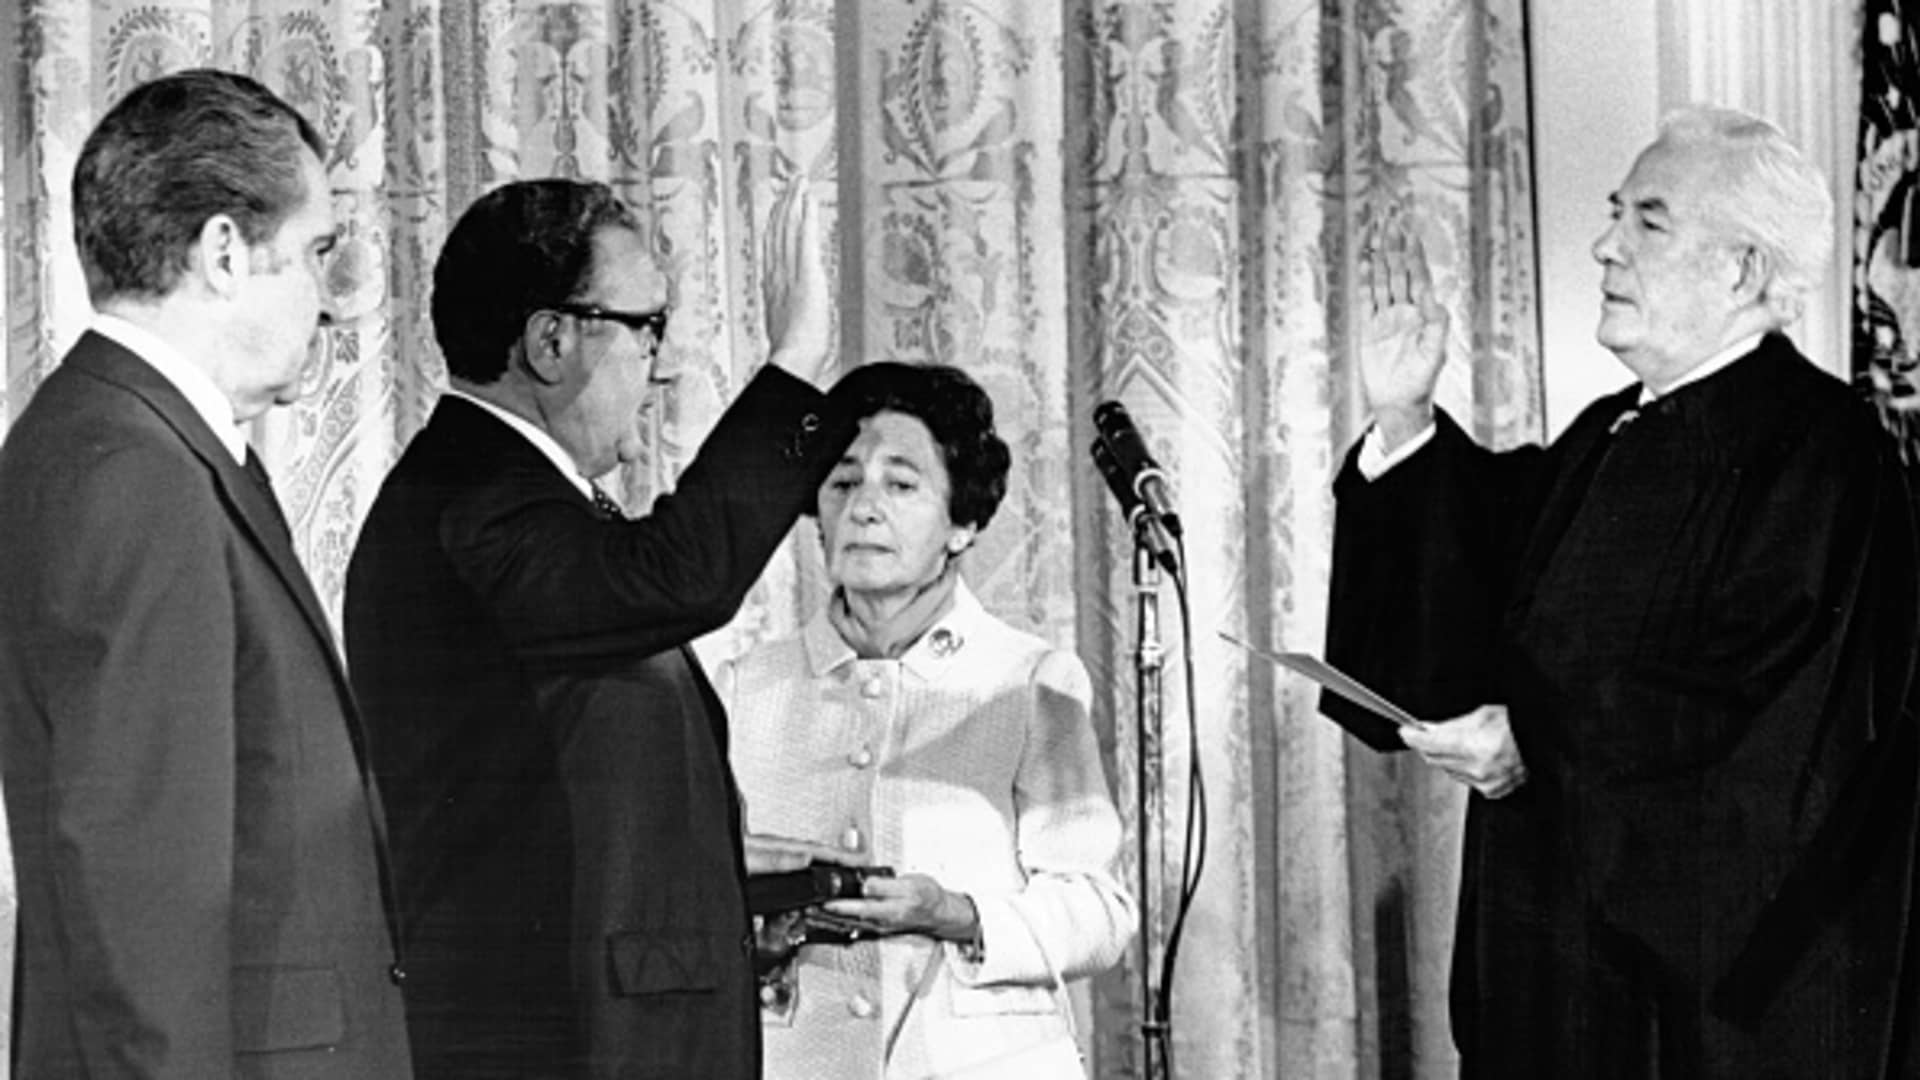 As President Richard Nixon watches, Henry Kissinger is sworn in as secretary of State by Chief Justice Warren Burger, September 1973. Kissinger's mother, Paula, holds the Bible.